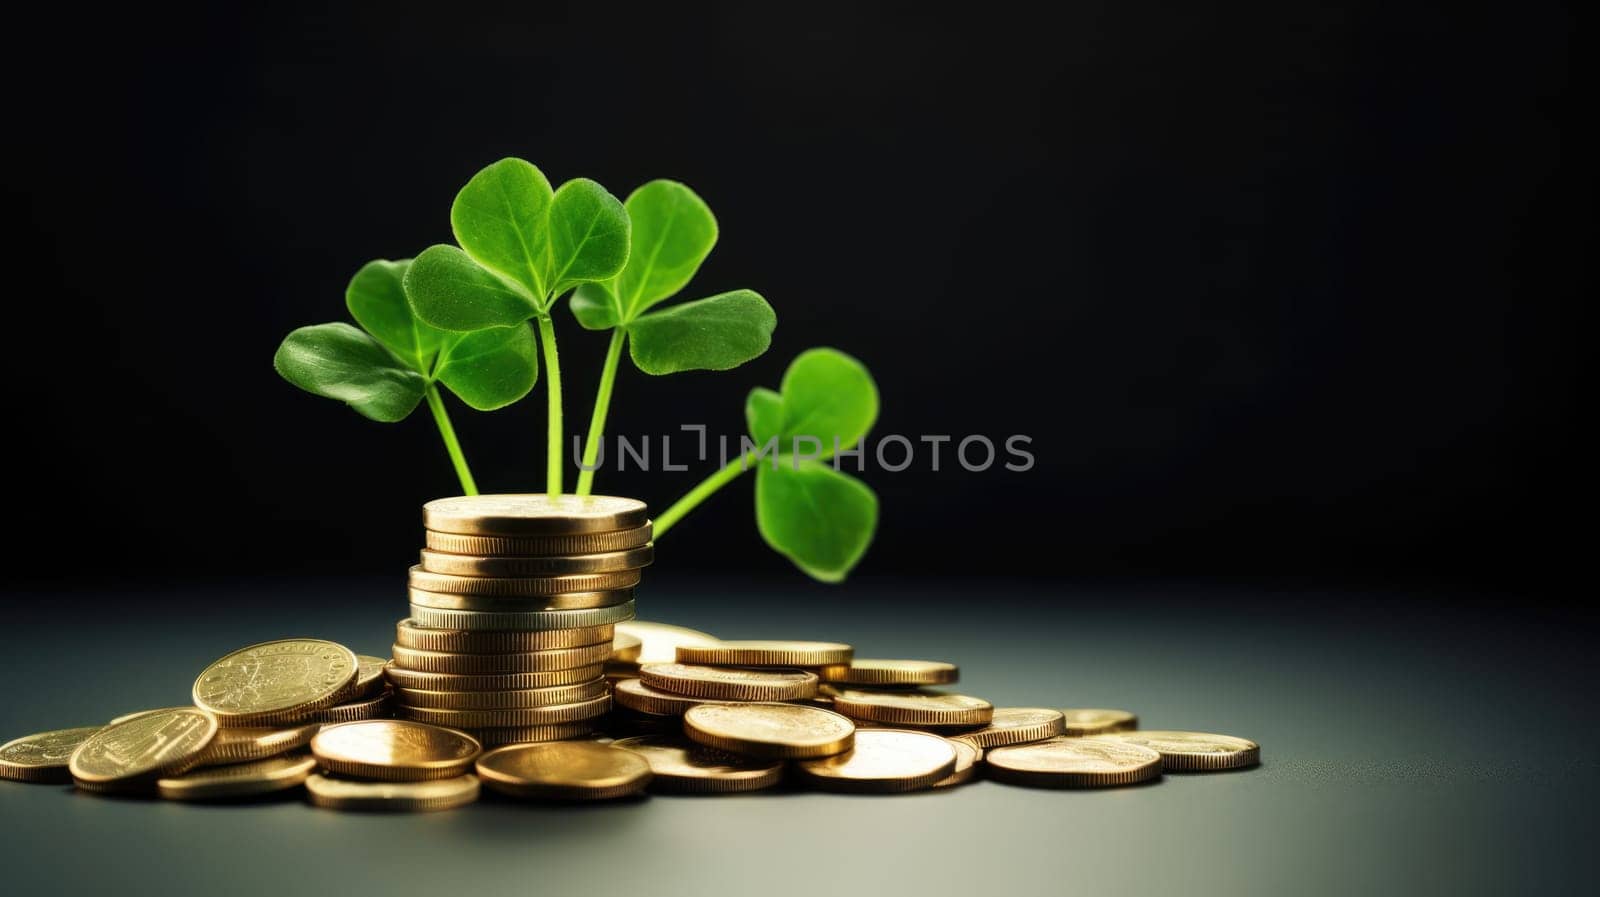 A vibrant four-leaf clover symbolizes good fortune on top of stack of gold coins. The coins encircle the clover, enhancing its charm against a dramatic black backdrop, evoking luck and prosperity.